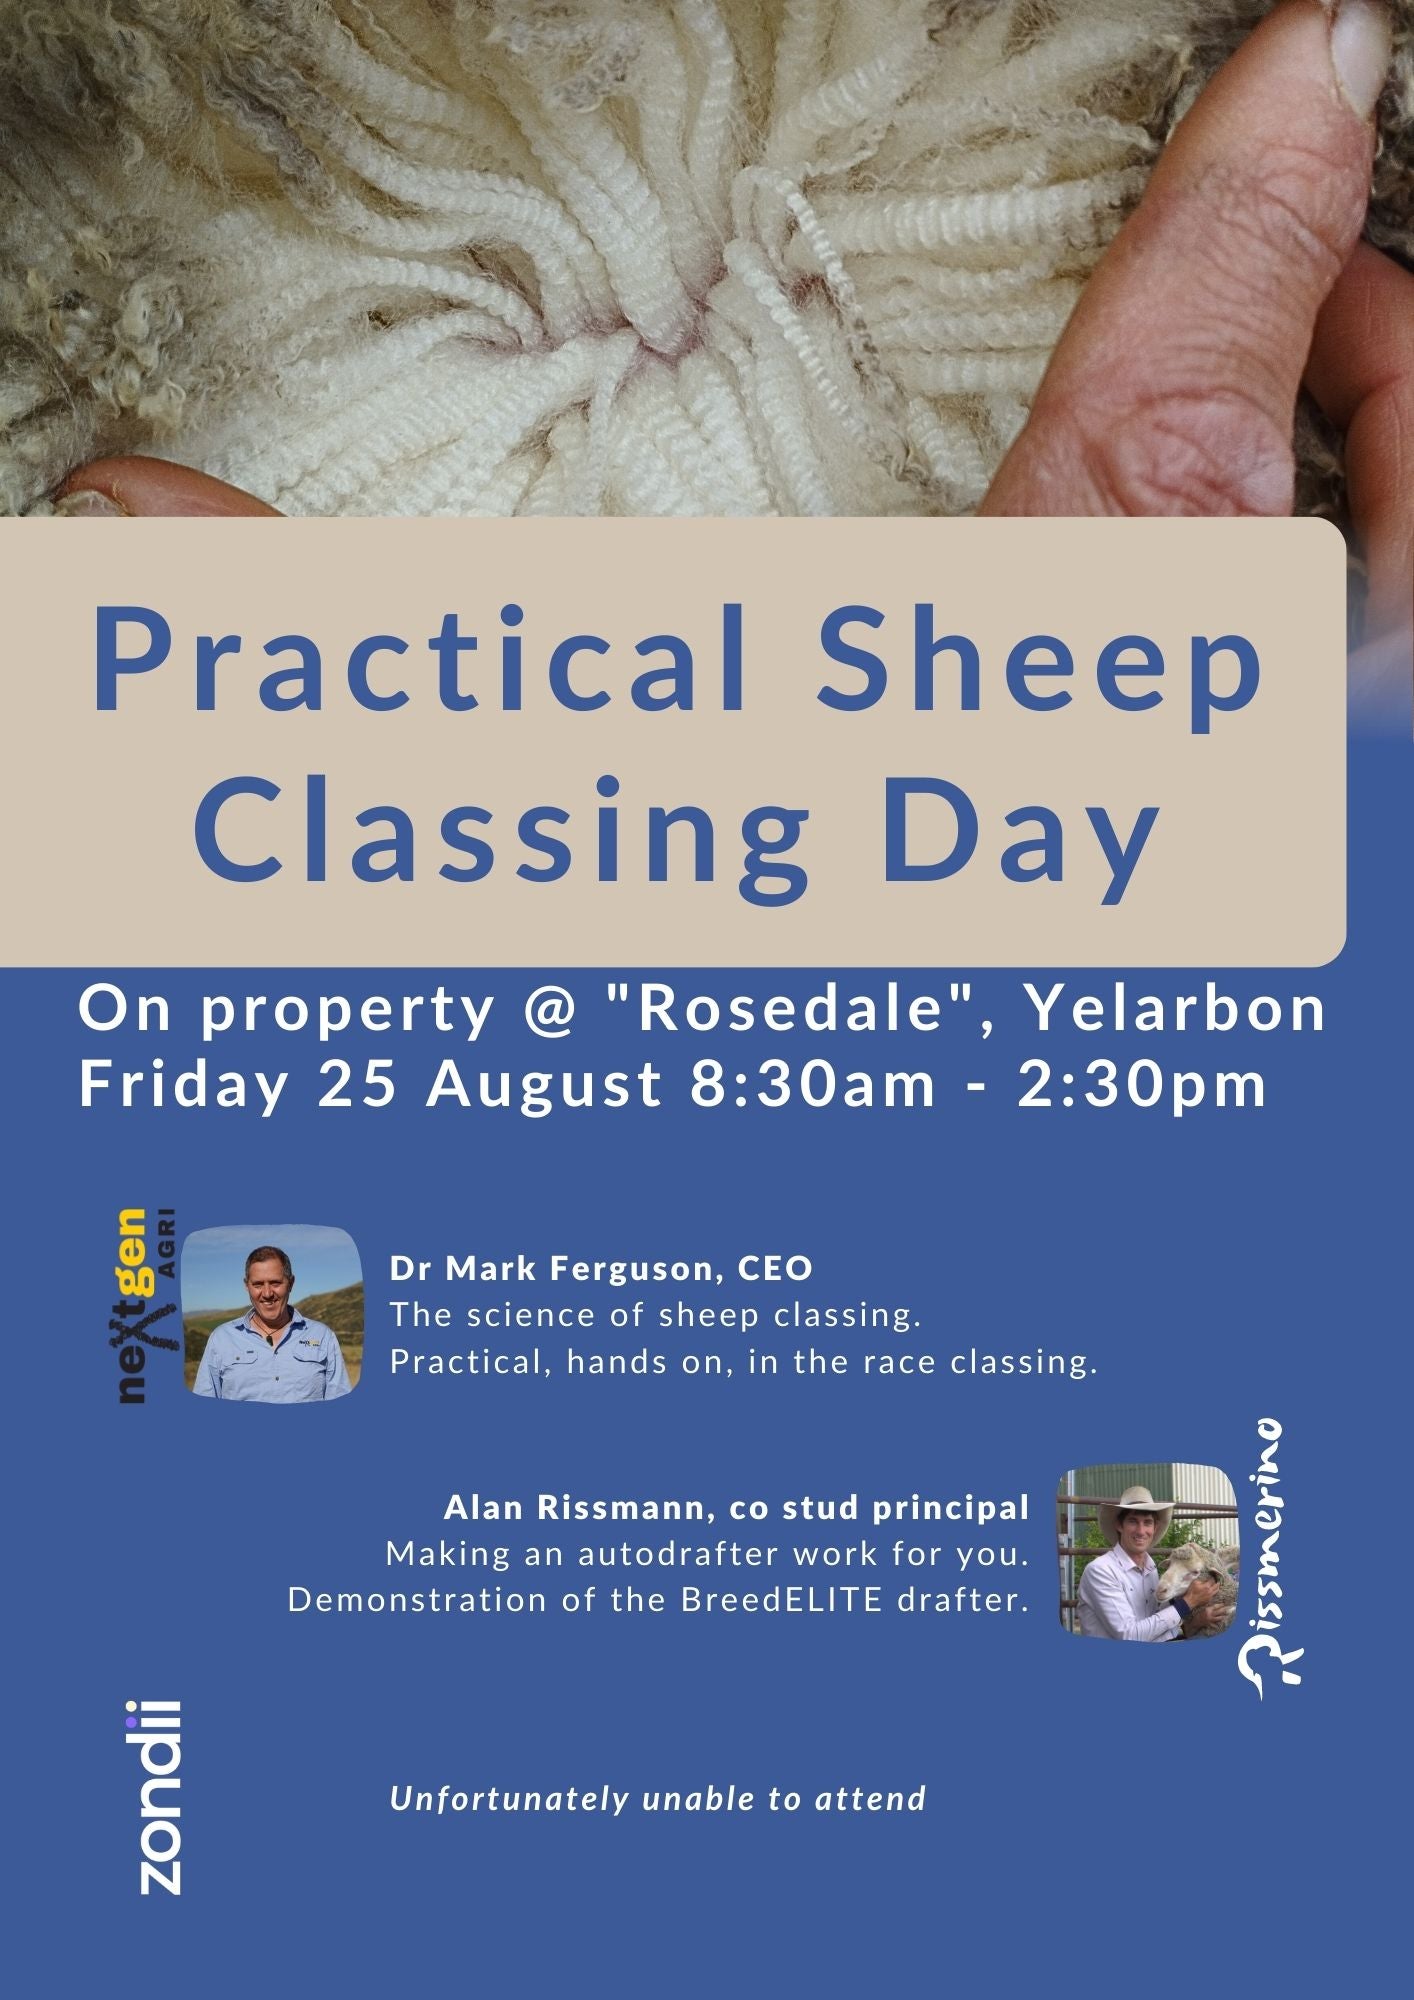 Practical Sheep Classing Day Flyer